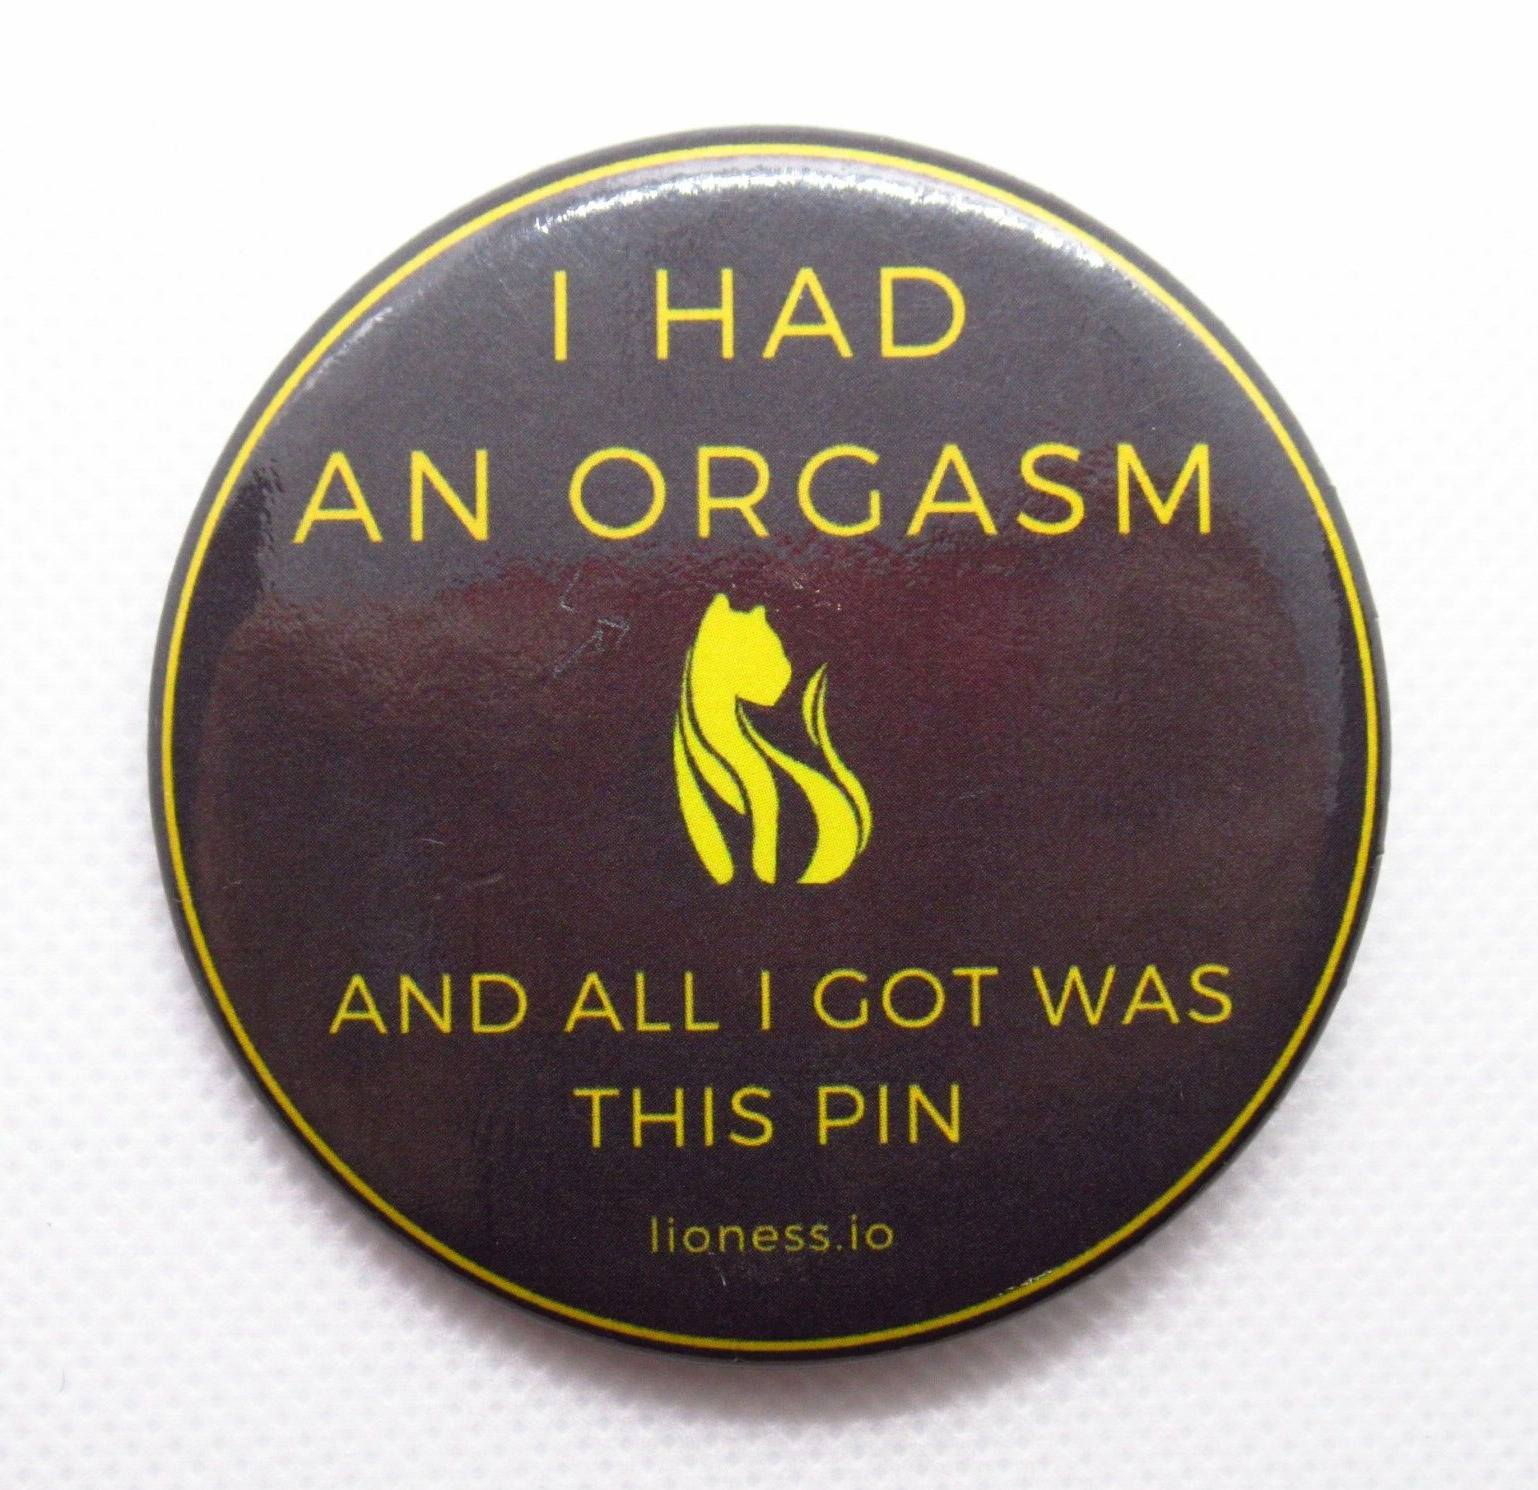 I Had An *rgasm & All I Got Was This Pin - Humor - Lion - Pinback Button